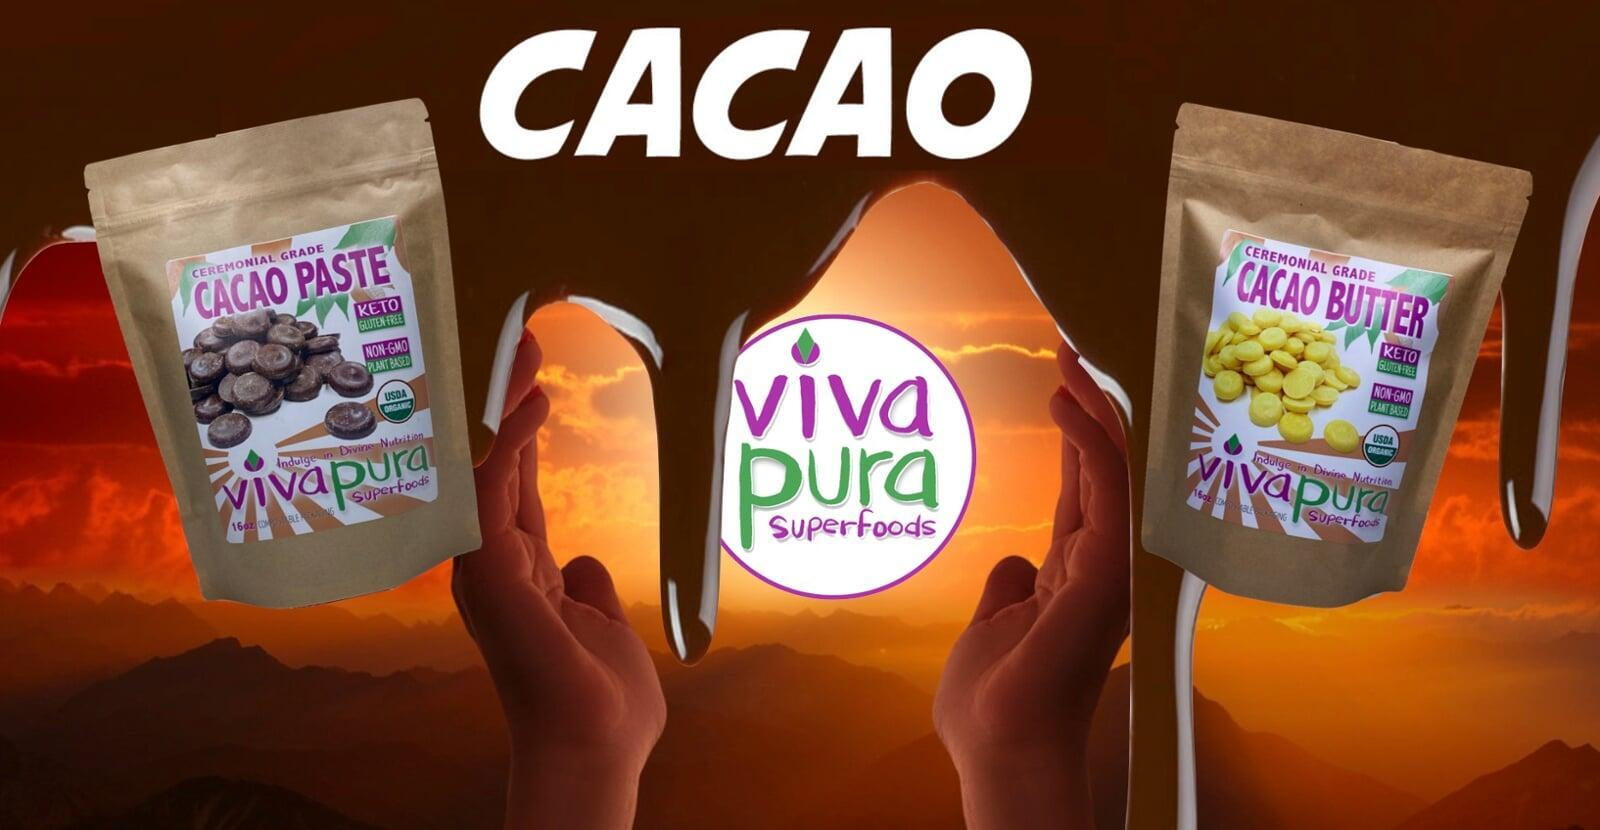 Vivapura Cacao Paste and Butter Sunset